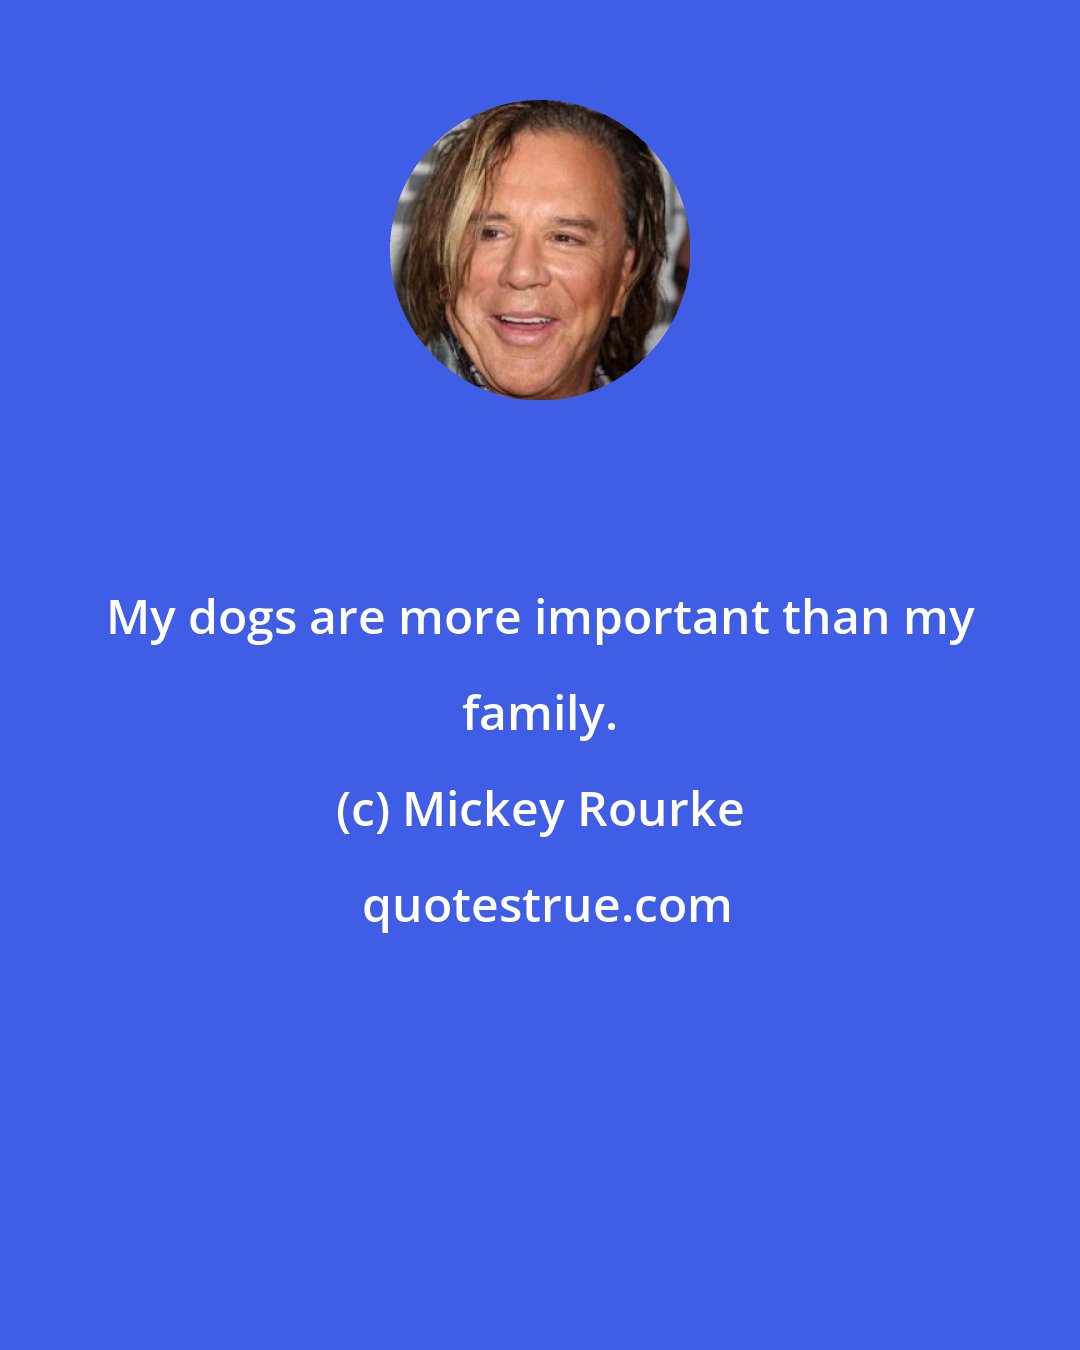 Mickey Rourke: My dogs are more important than my family.